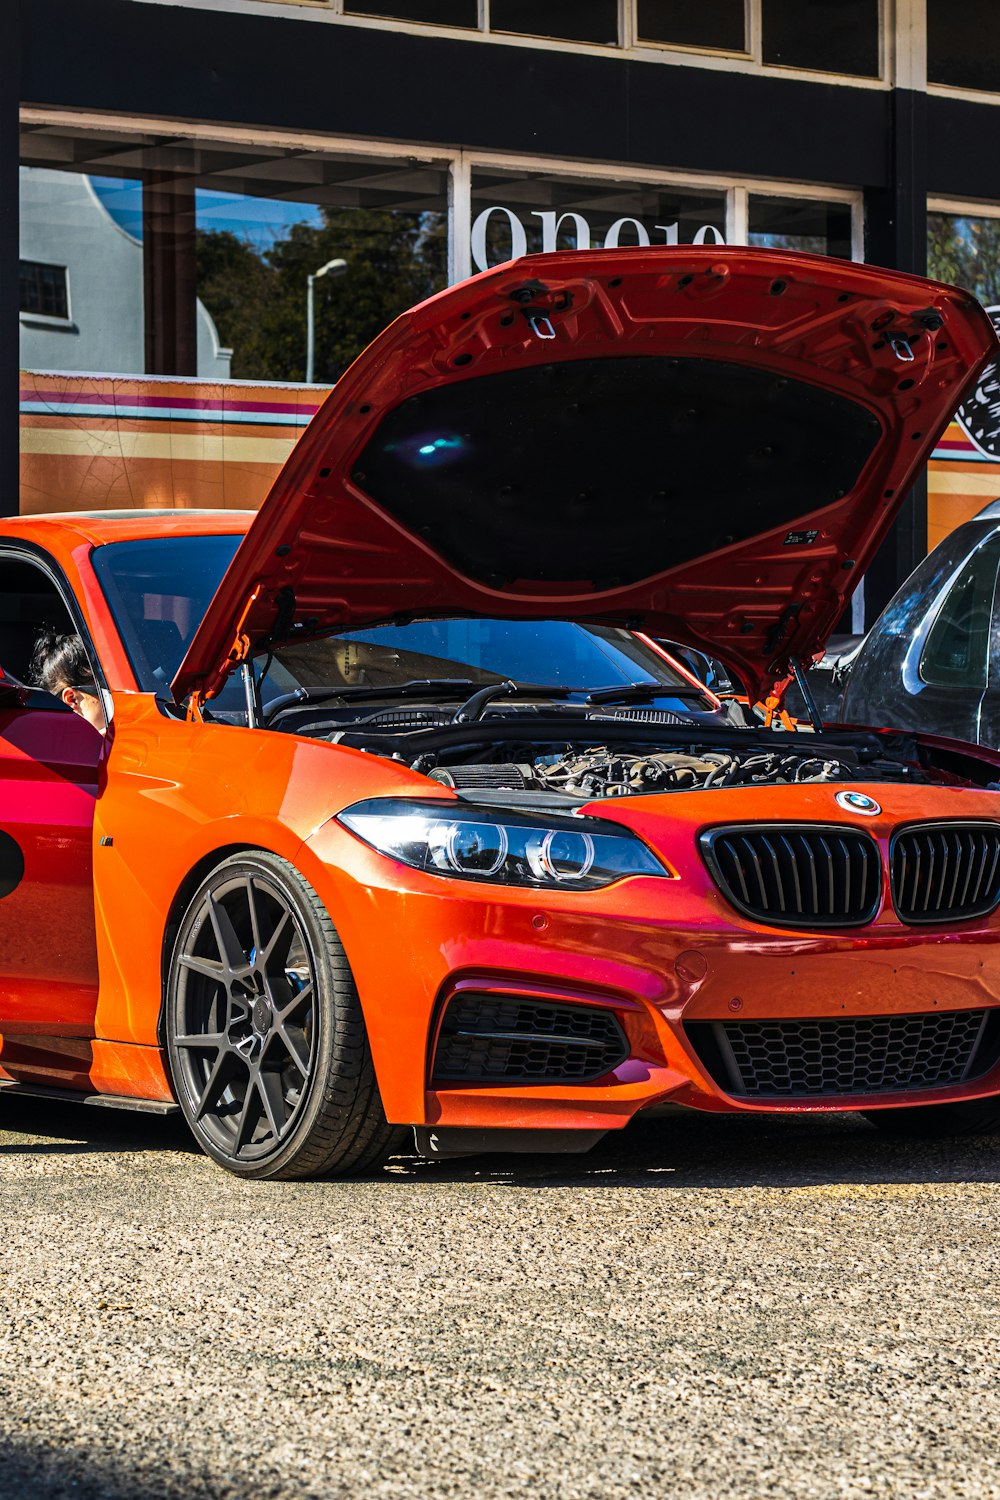 an orange bmw car with its hood open